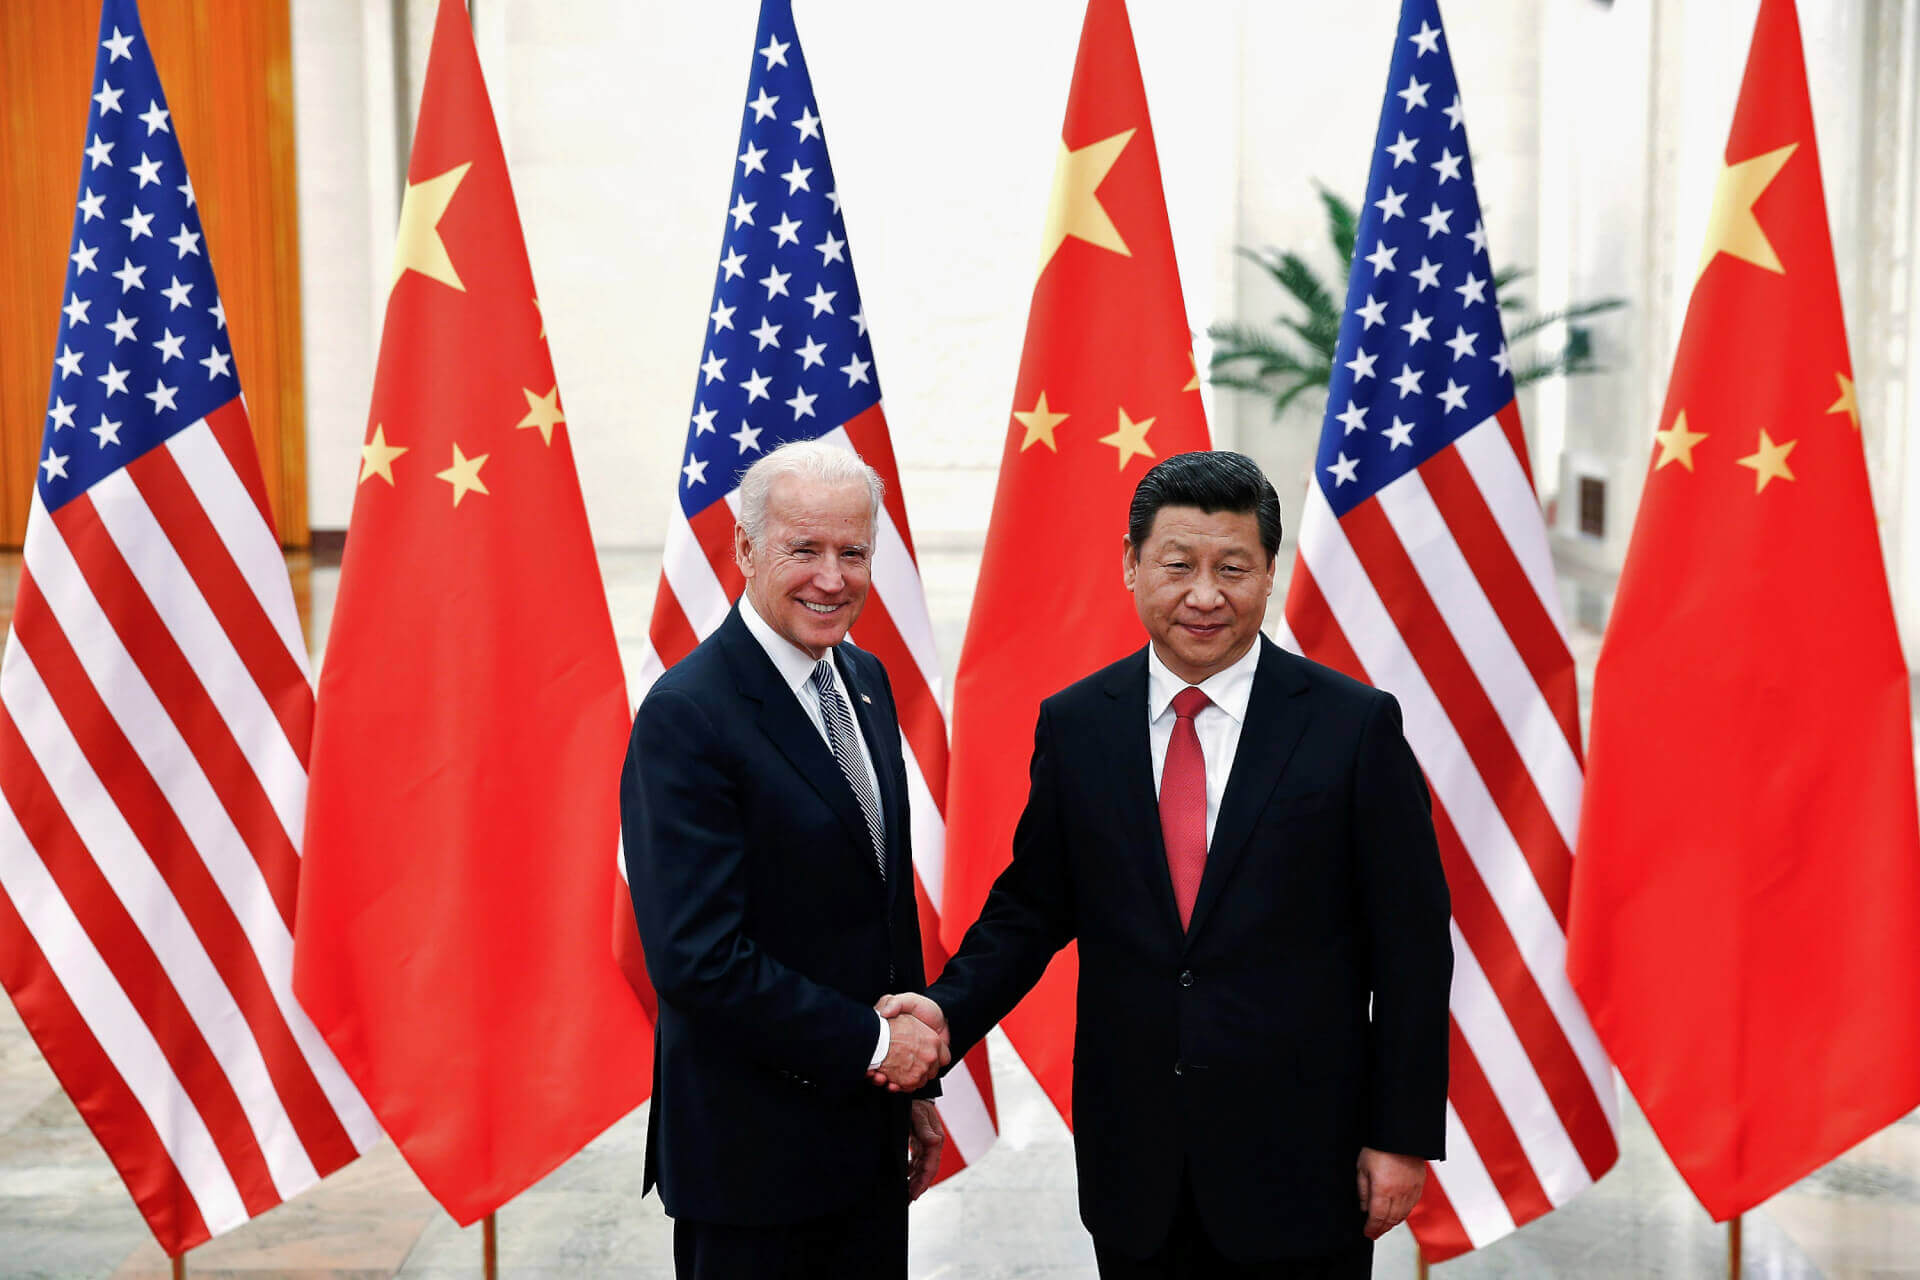 Biden to Discuss Removal of Trump-Era Tariffs With Xi to Counter Soaring Inflation